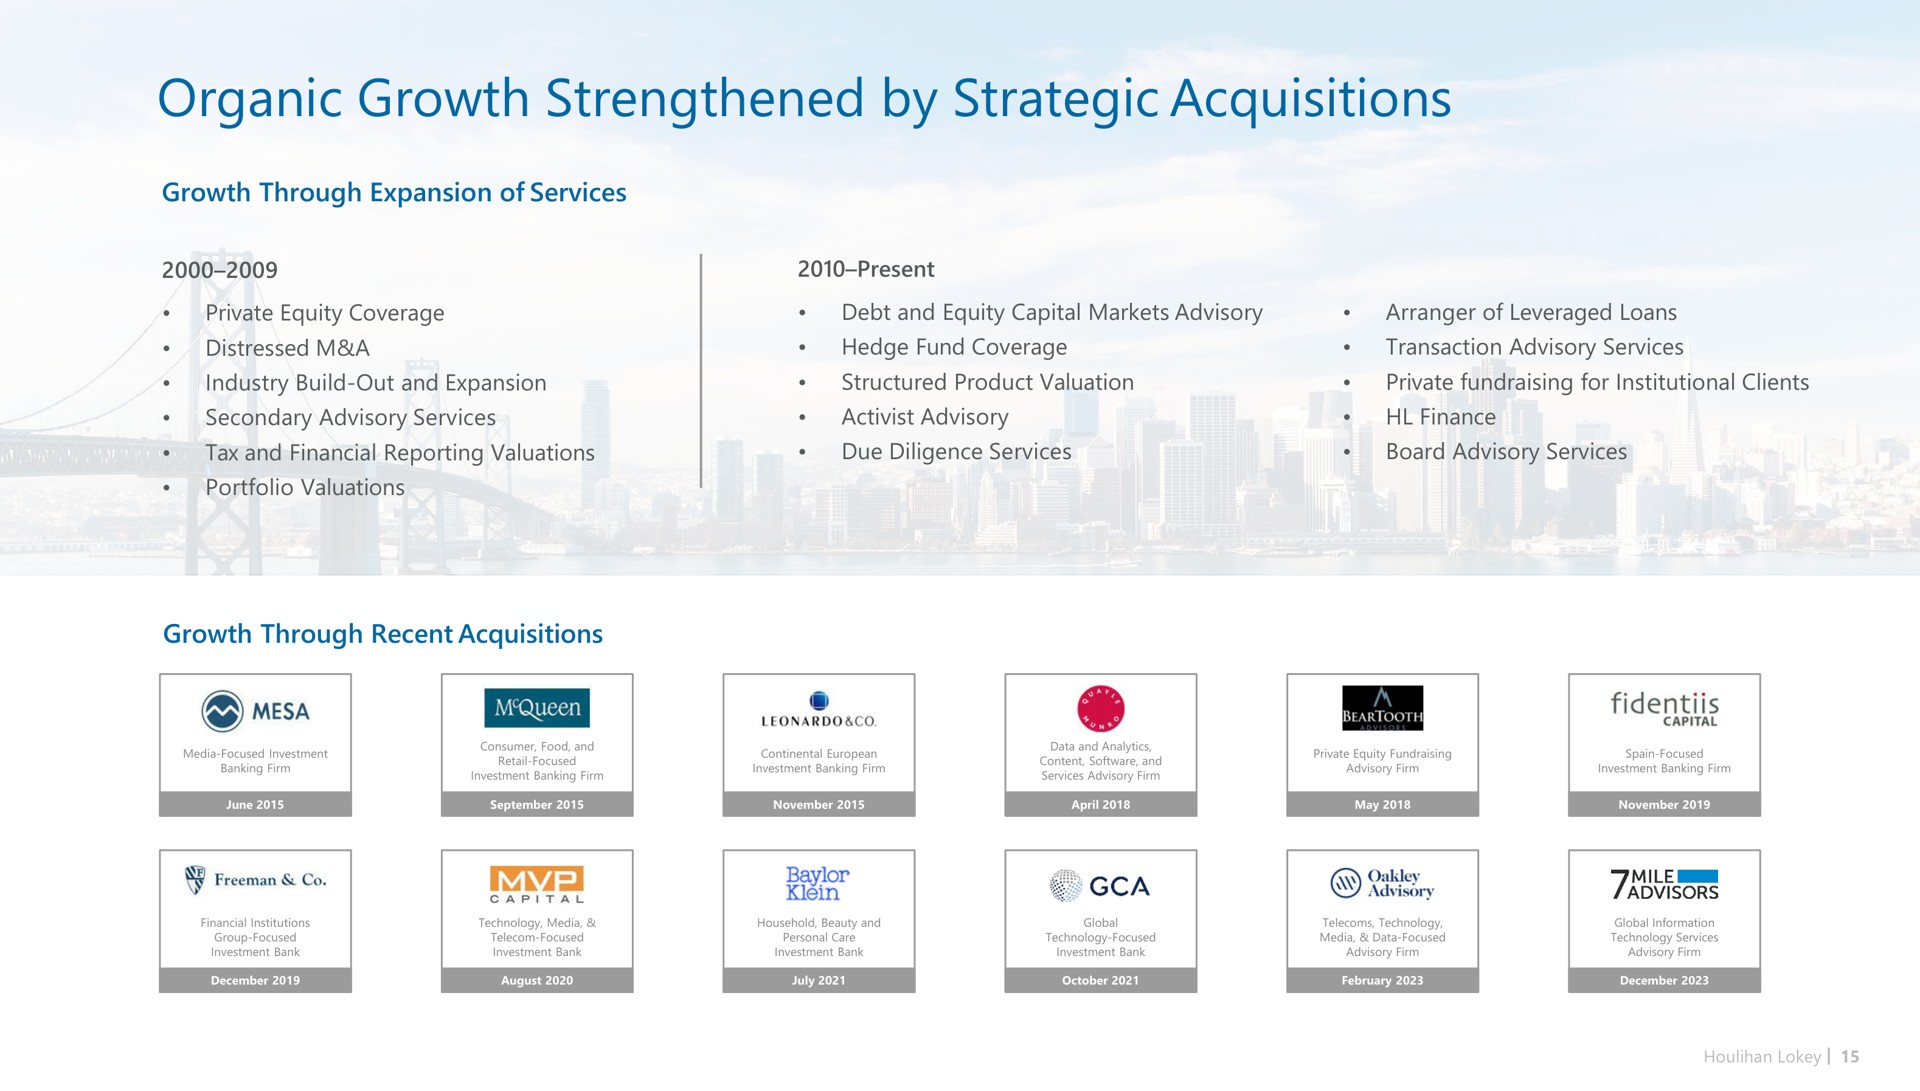 organic growth strengthened by strategic acquisitions | Houlihan Lokey